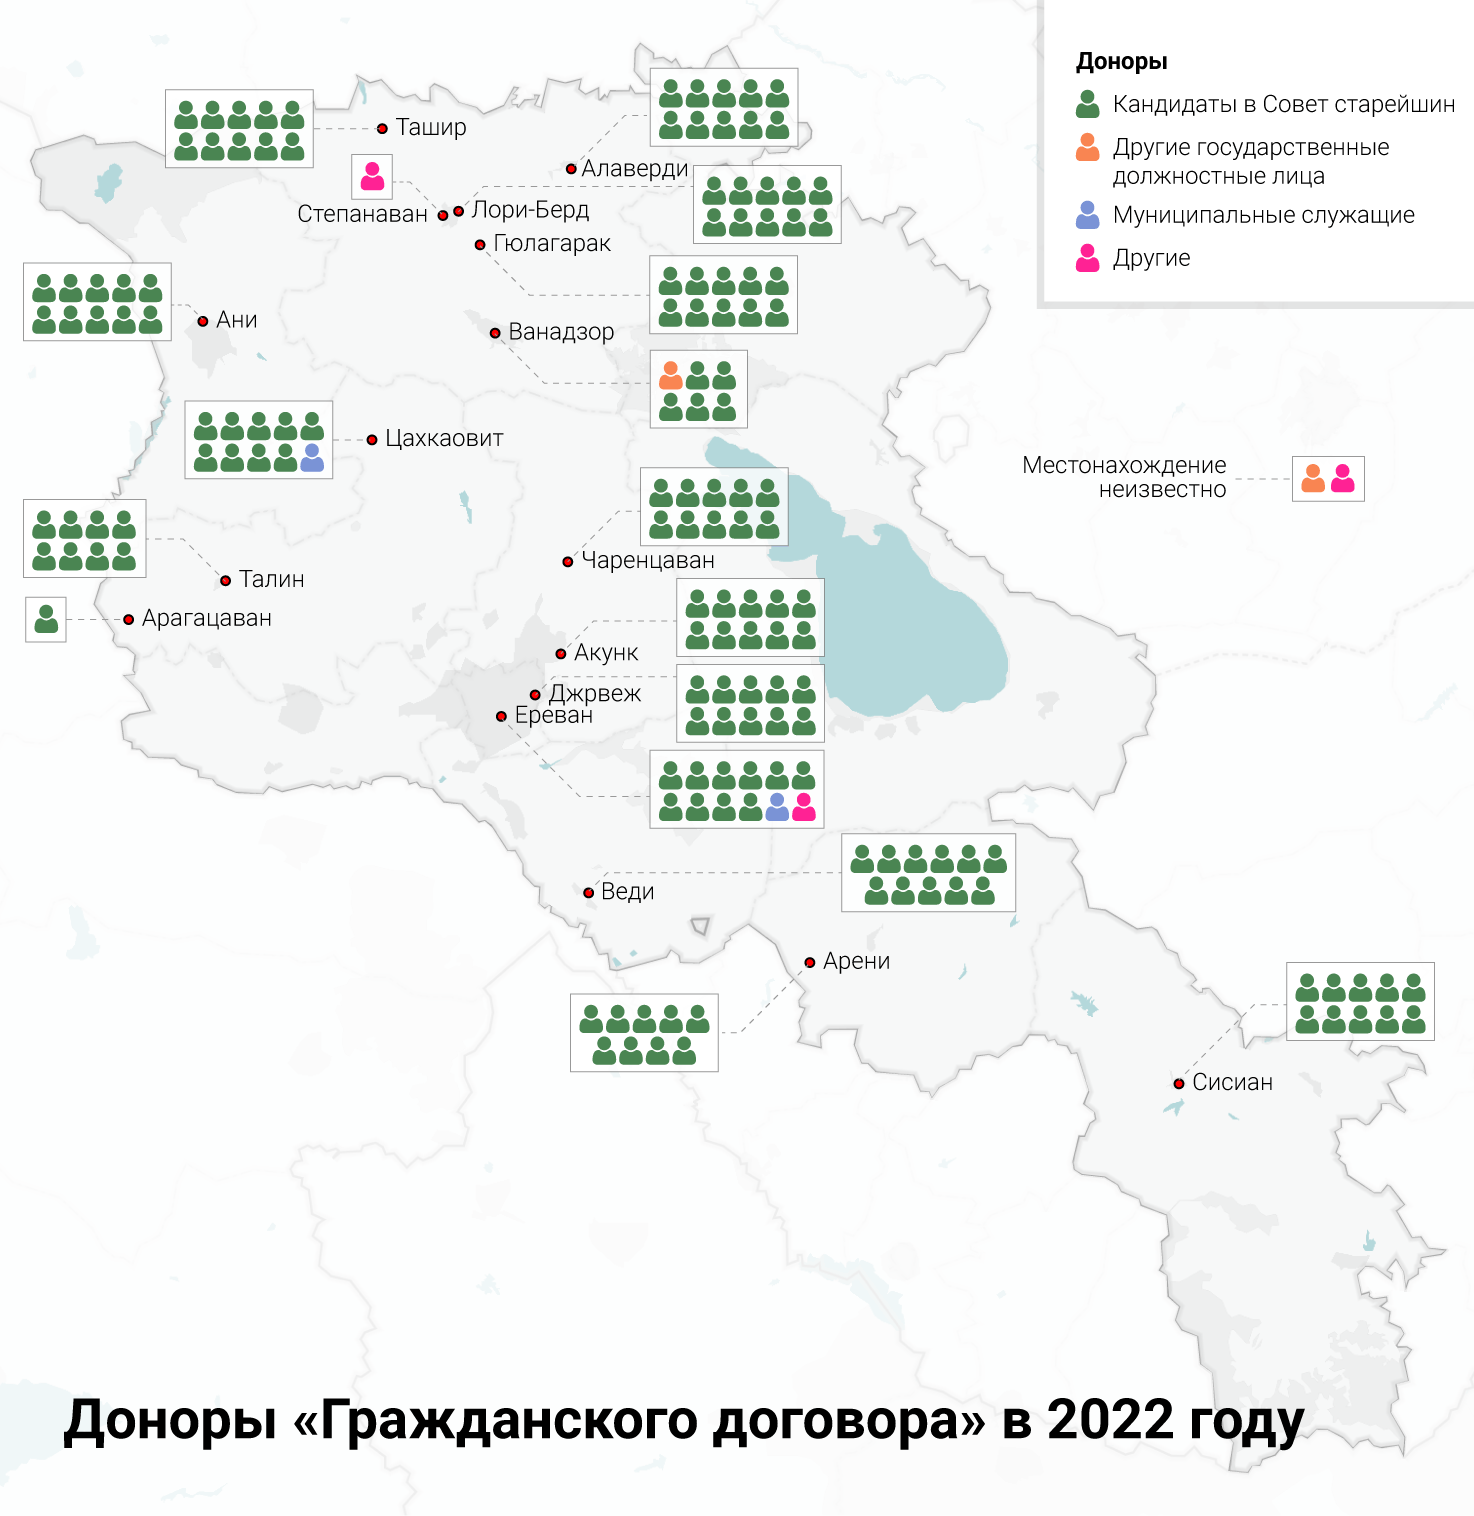 investigations/civil-contract-donors-2022-map-rus.png